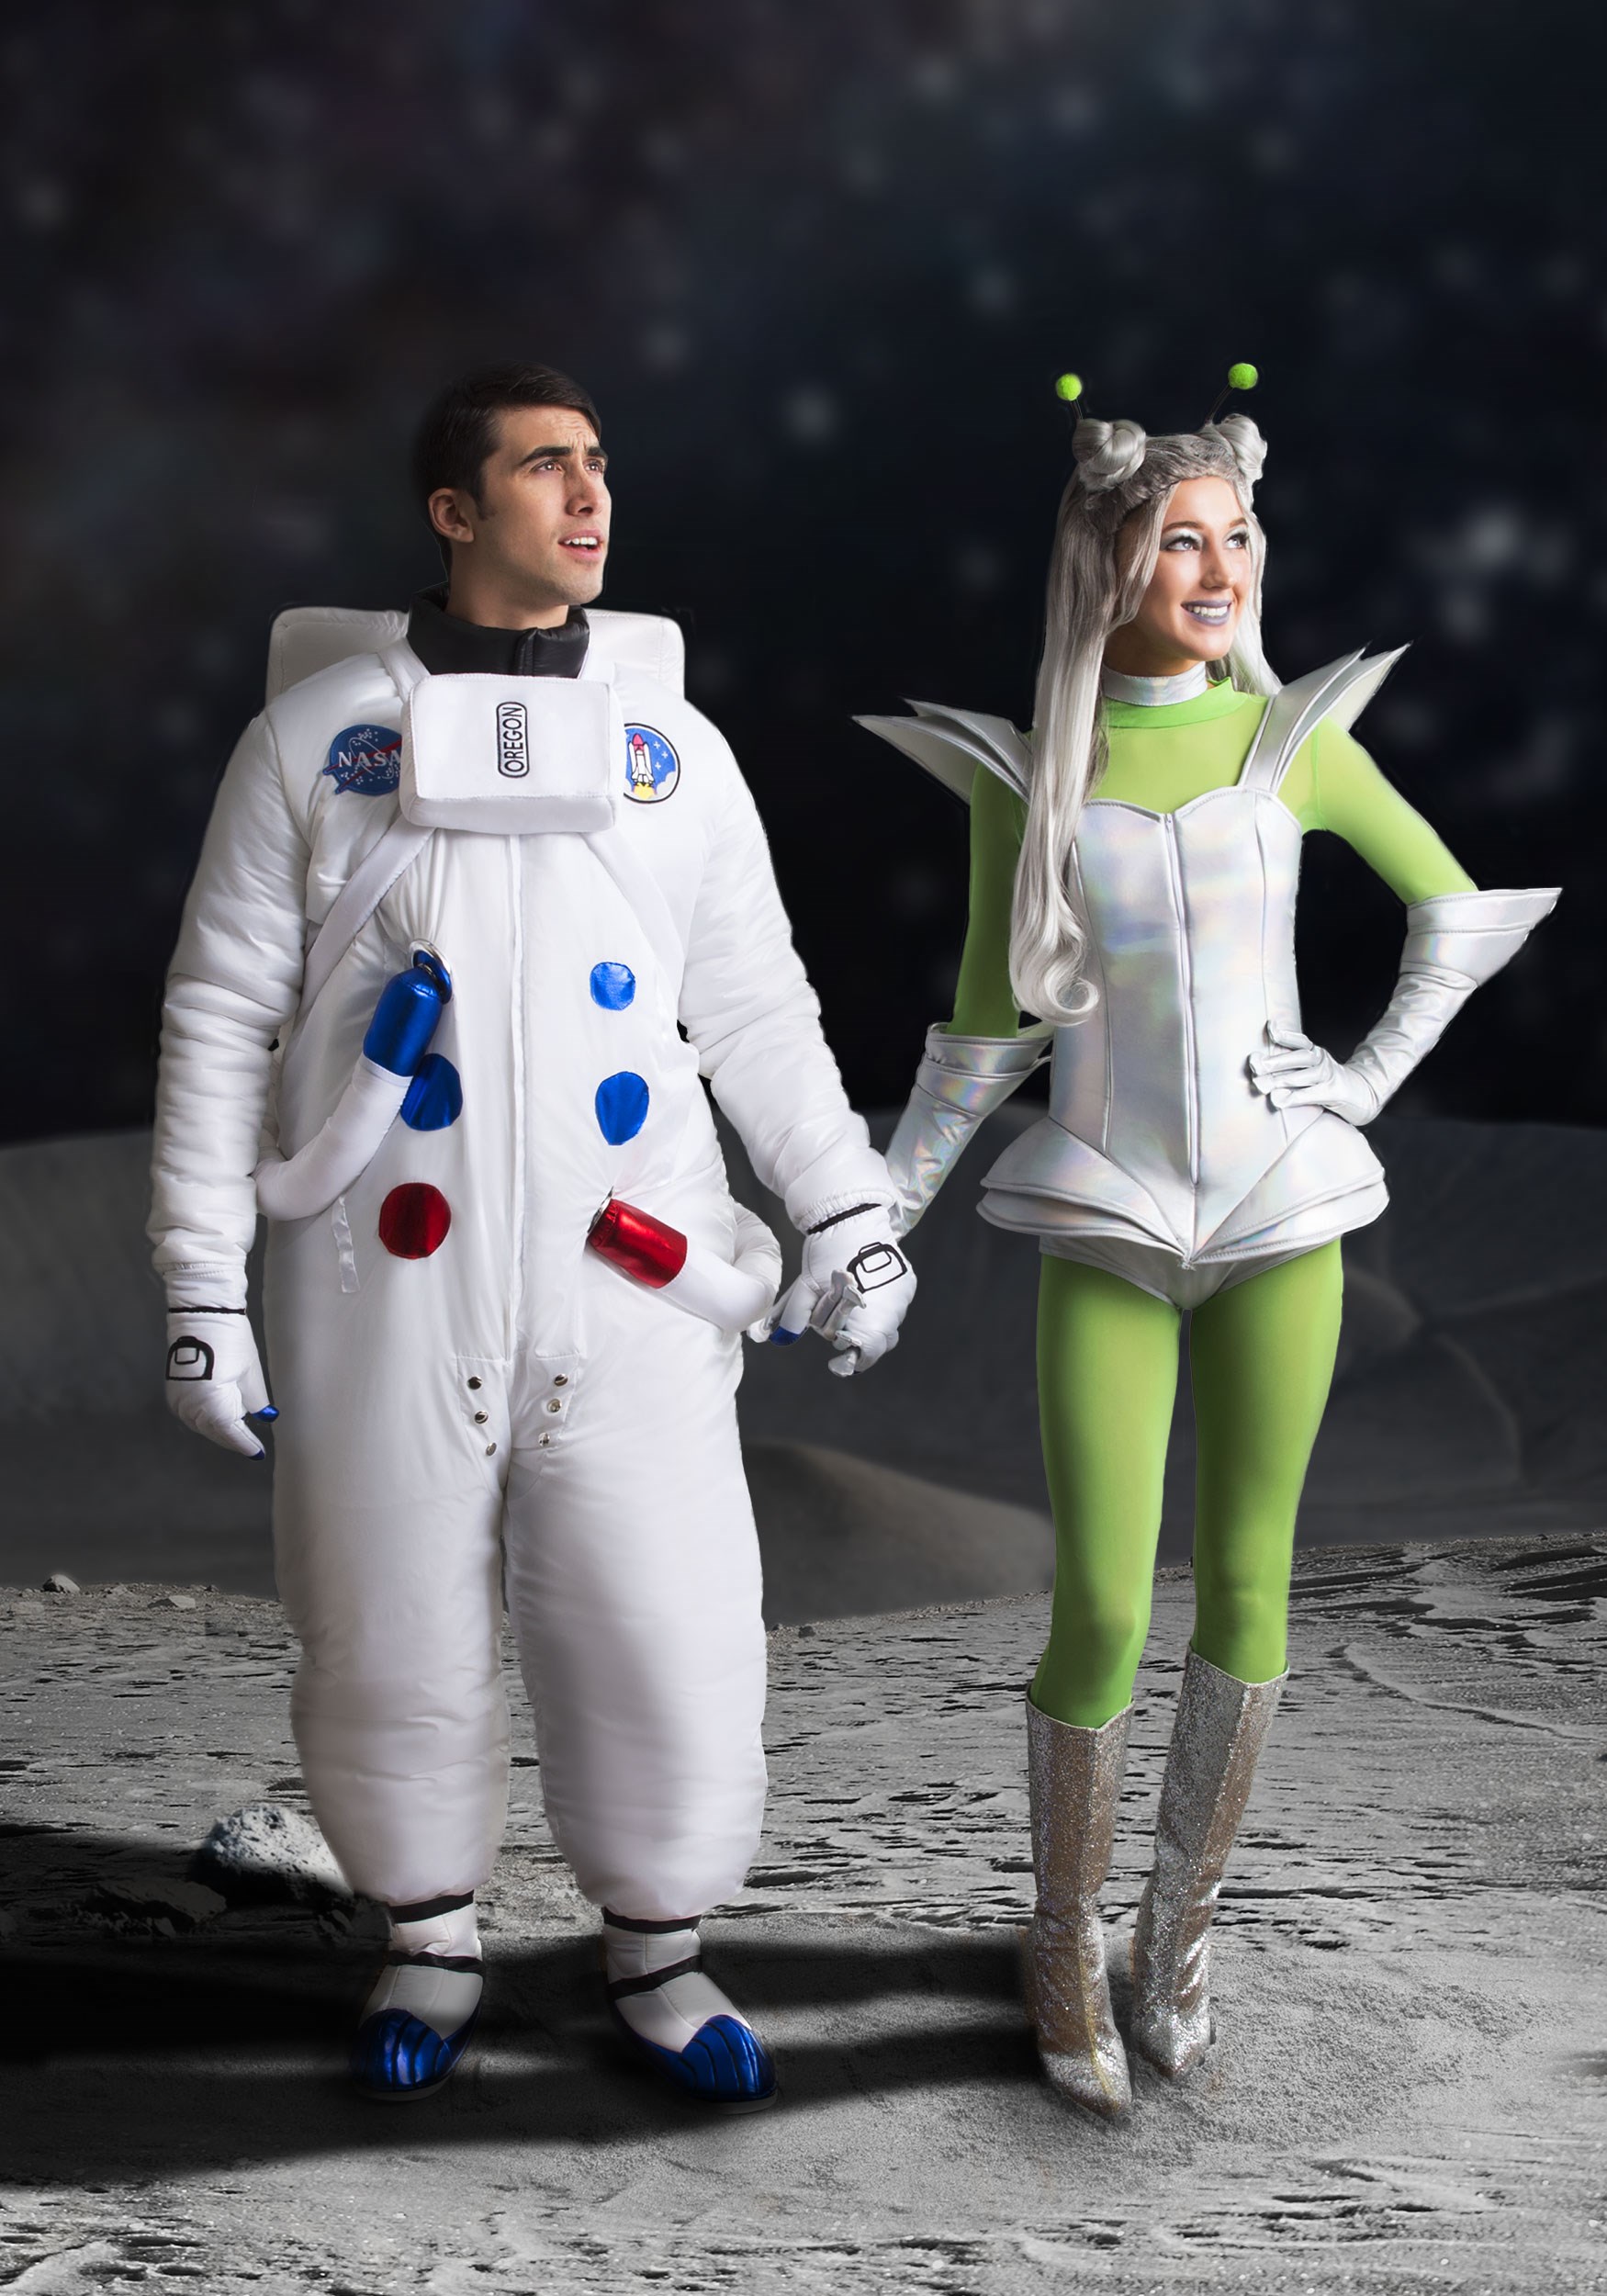 Alien And Astronaut Costume Galactic Alien Babe Costume For Women